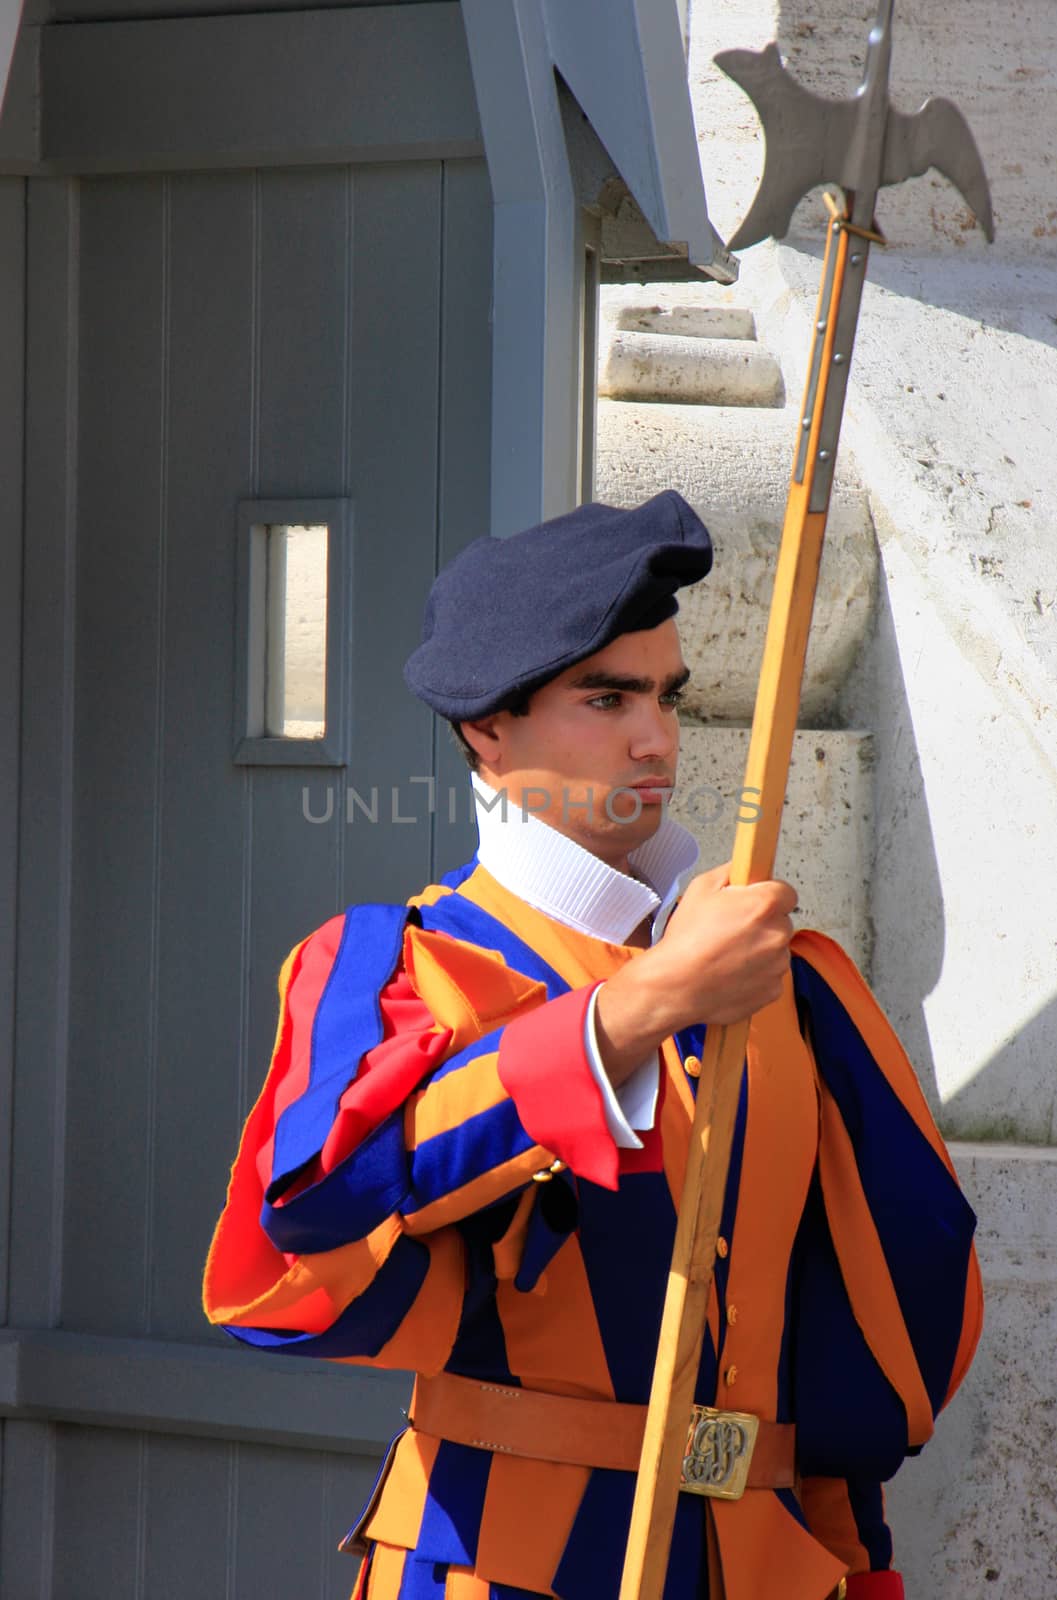 Pontifical Swiss Guard, Vatican city, Rome by donya_nedomam